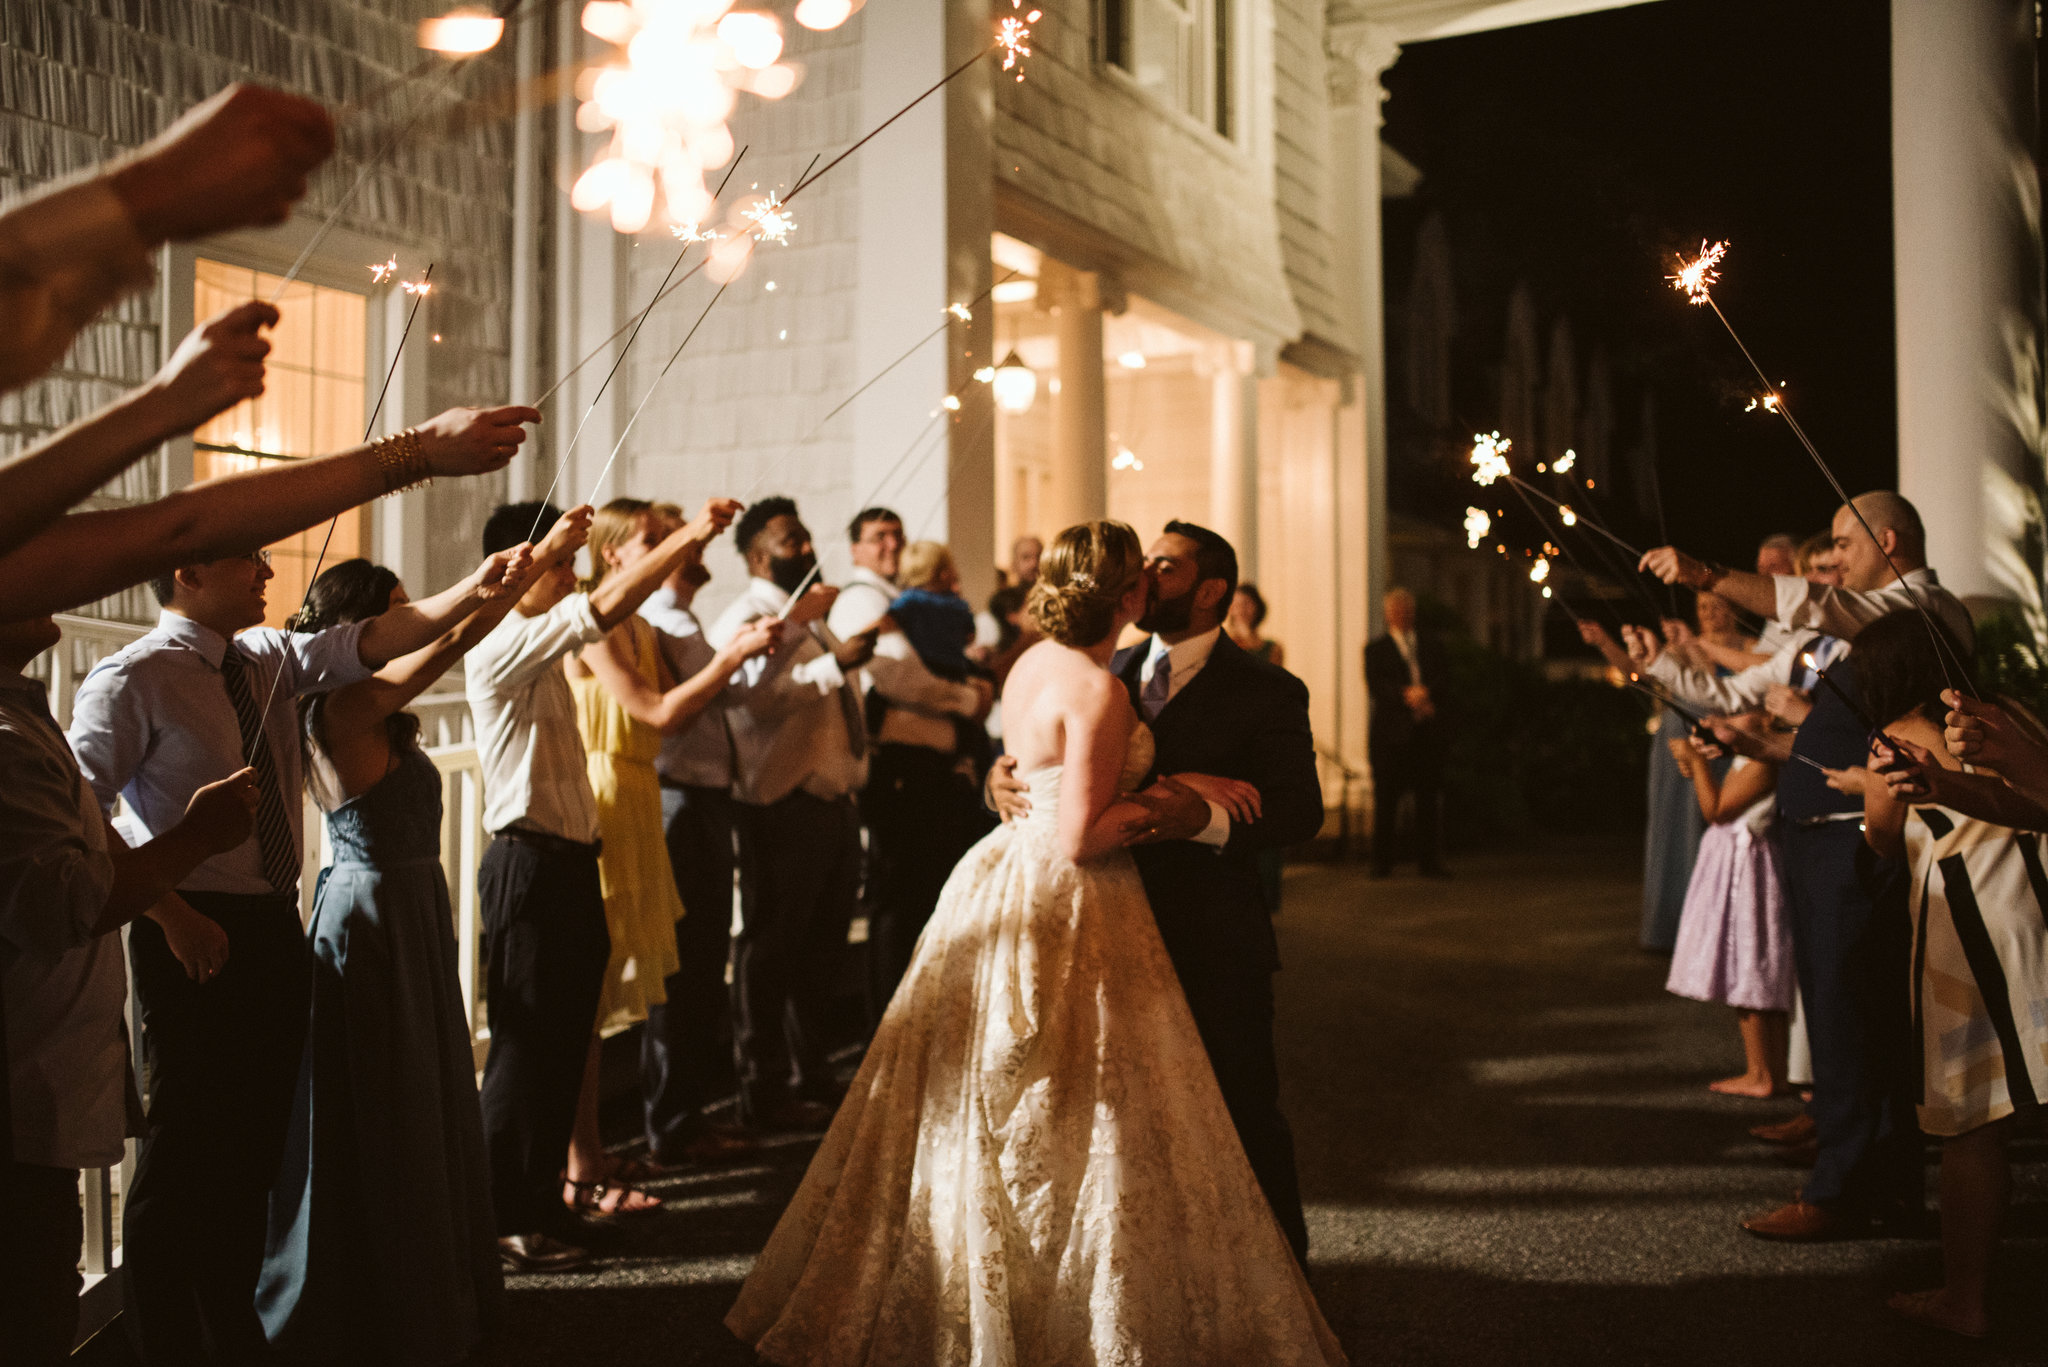  Ellicott City, Baltimore Wedding Photographer, Wayside Inn, Summer Wedding, Romantic, Traditional, Bride and groom Kissing Surrounded by Sparklers Outside Venue 